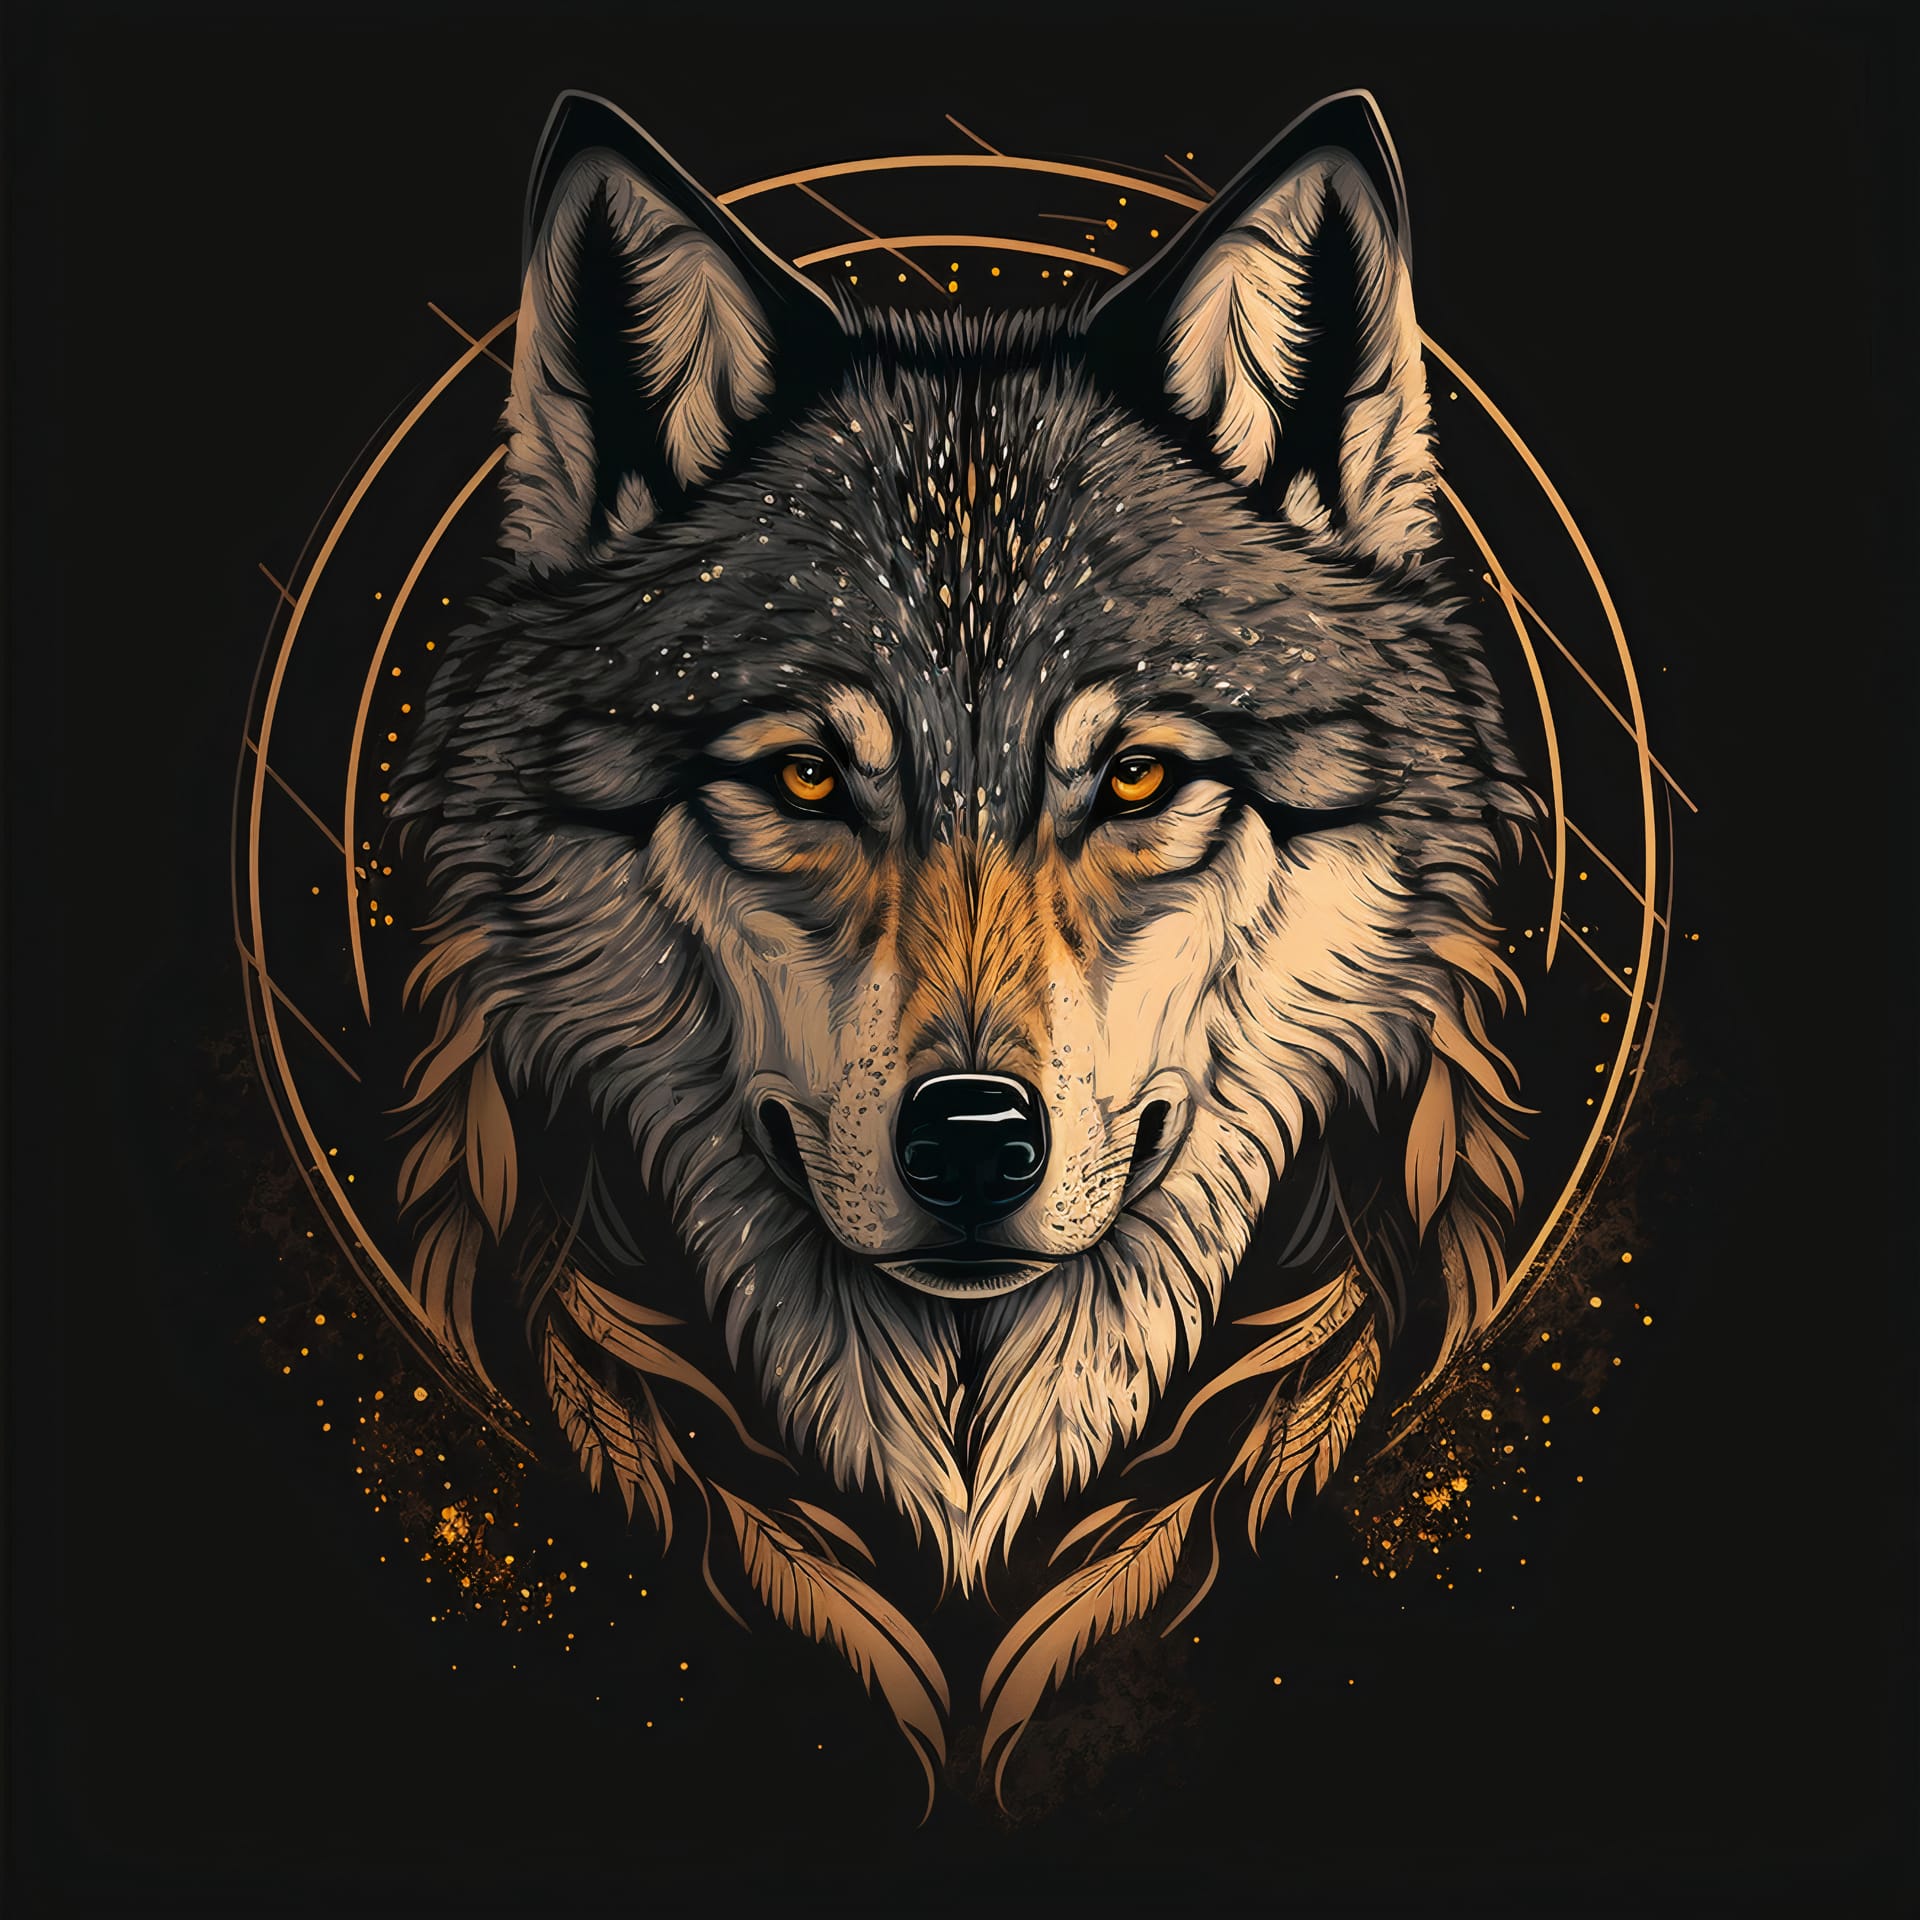 Illustration front view wolf head stunningly beautiful design moody image